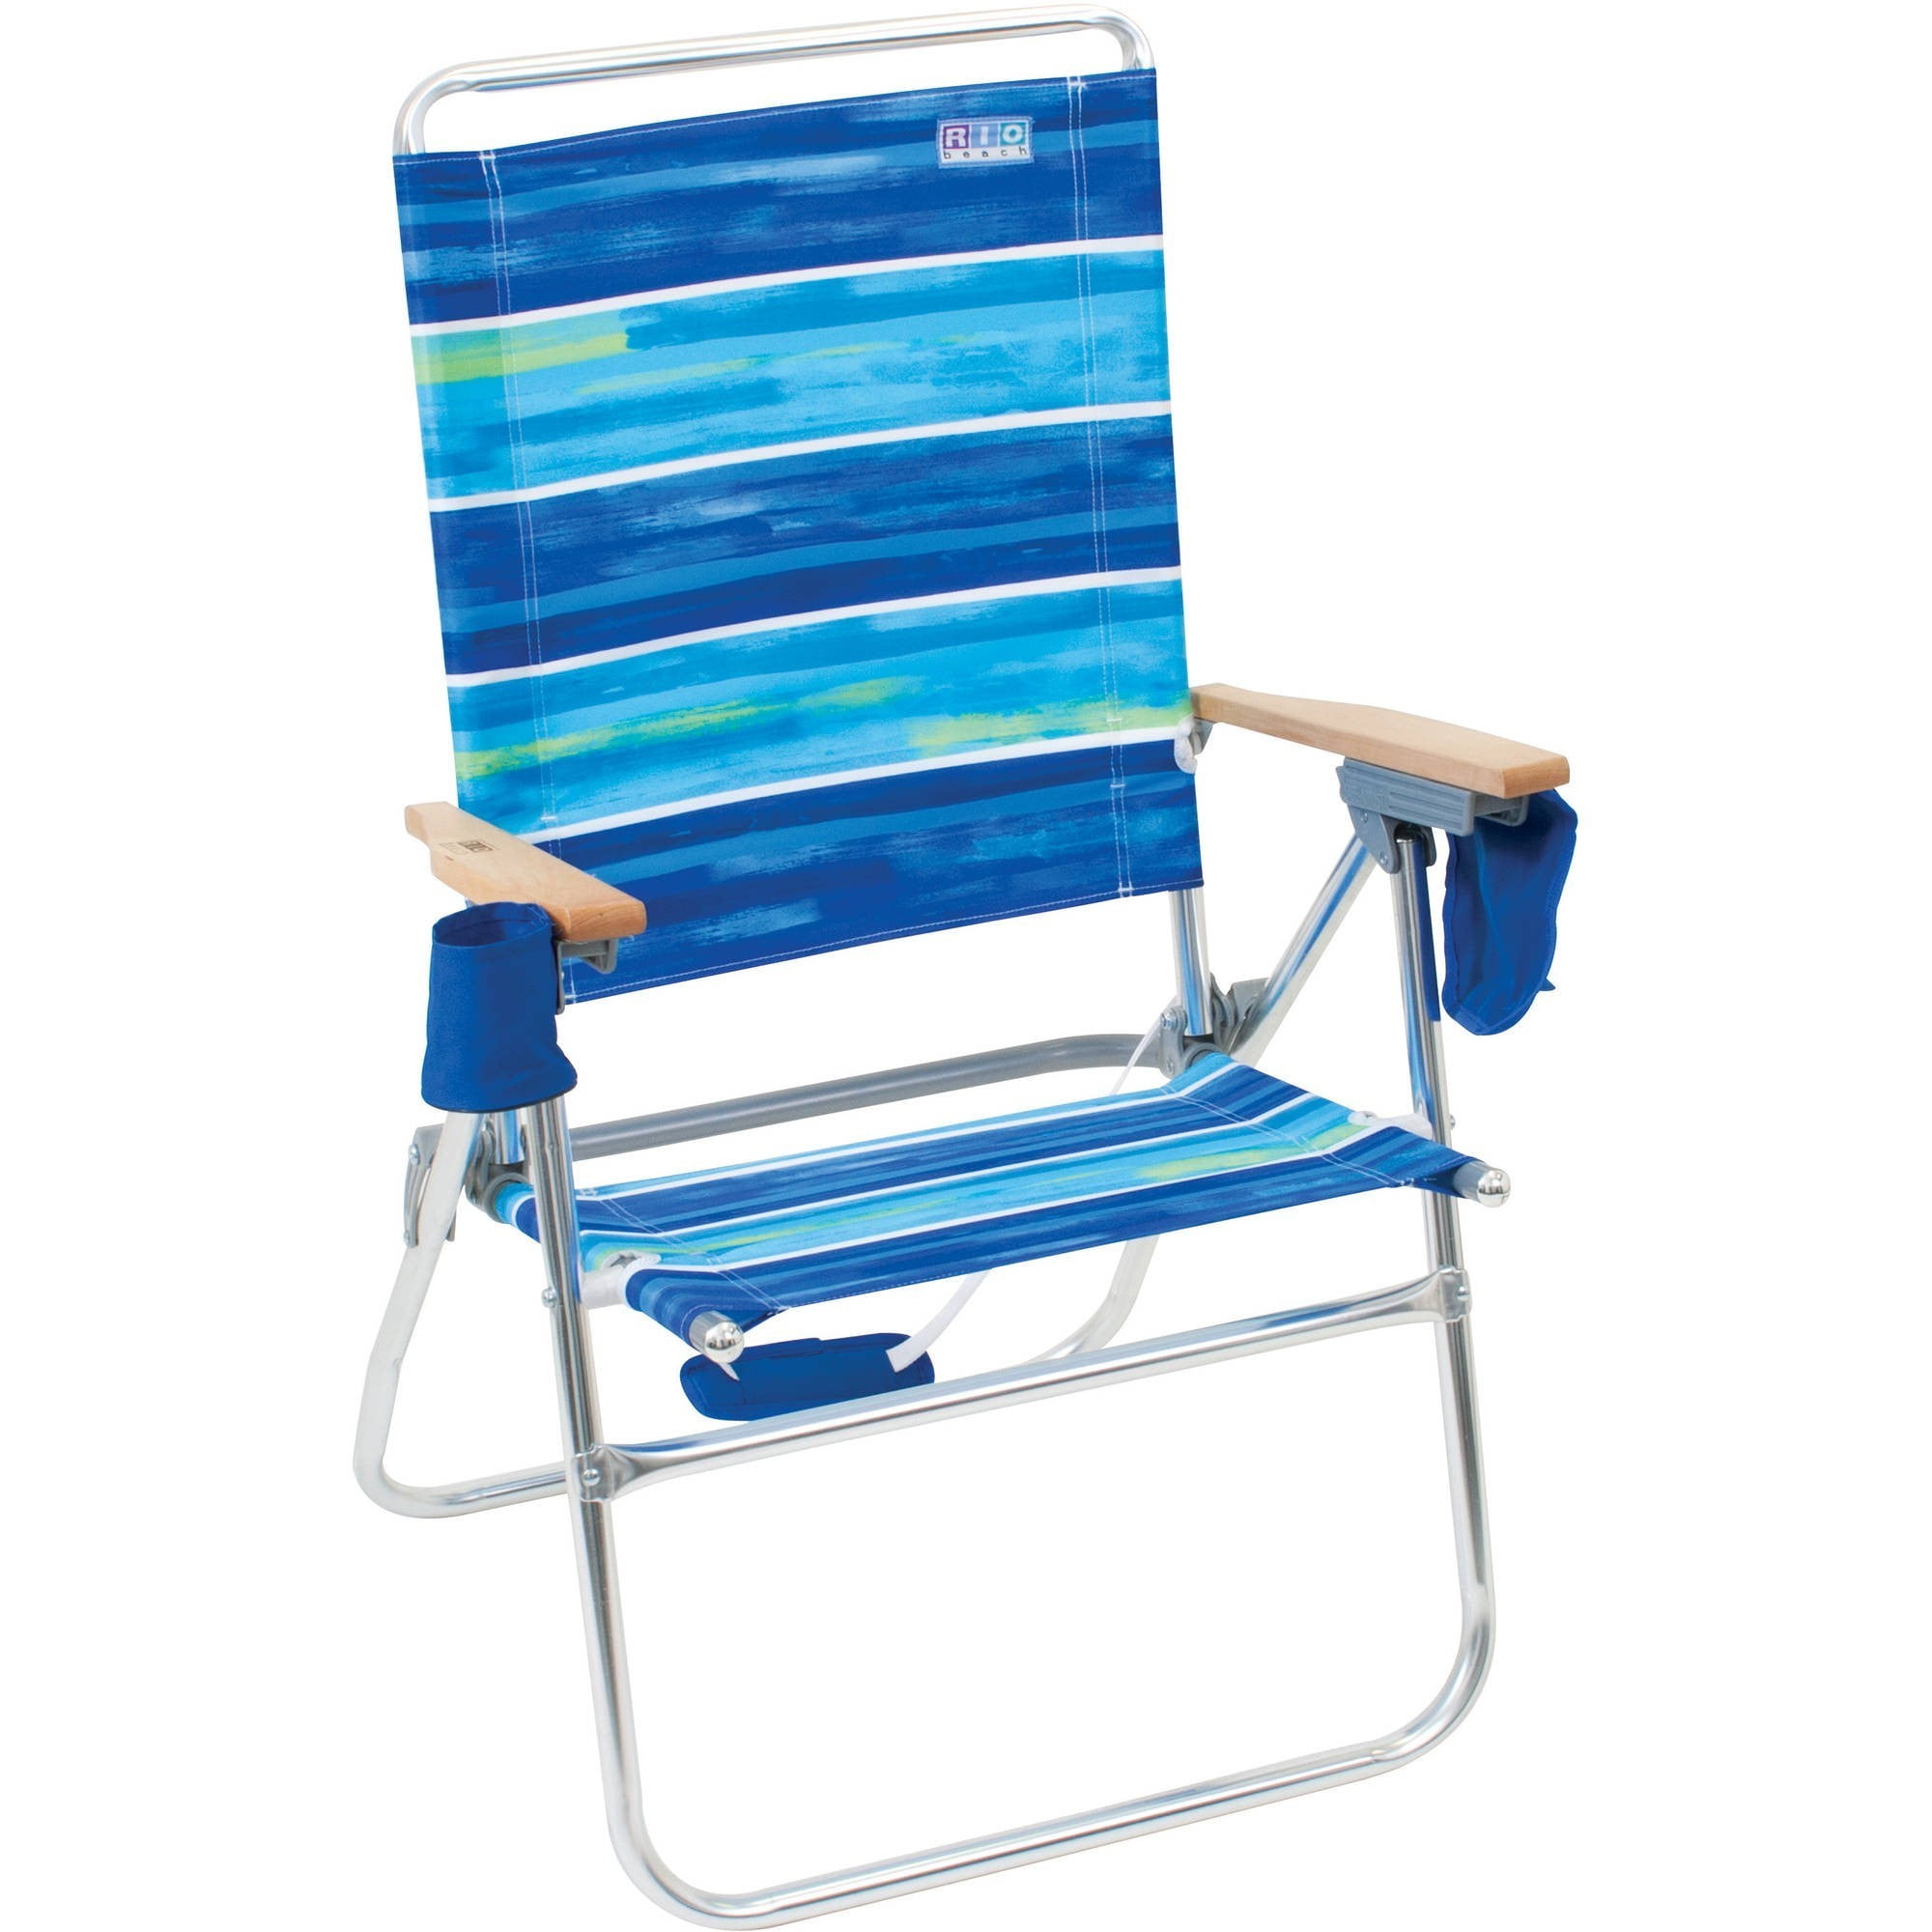 Creatice 17 Beach Chair for Small Space